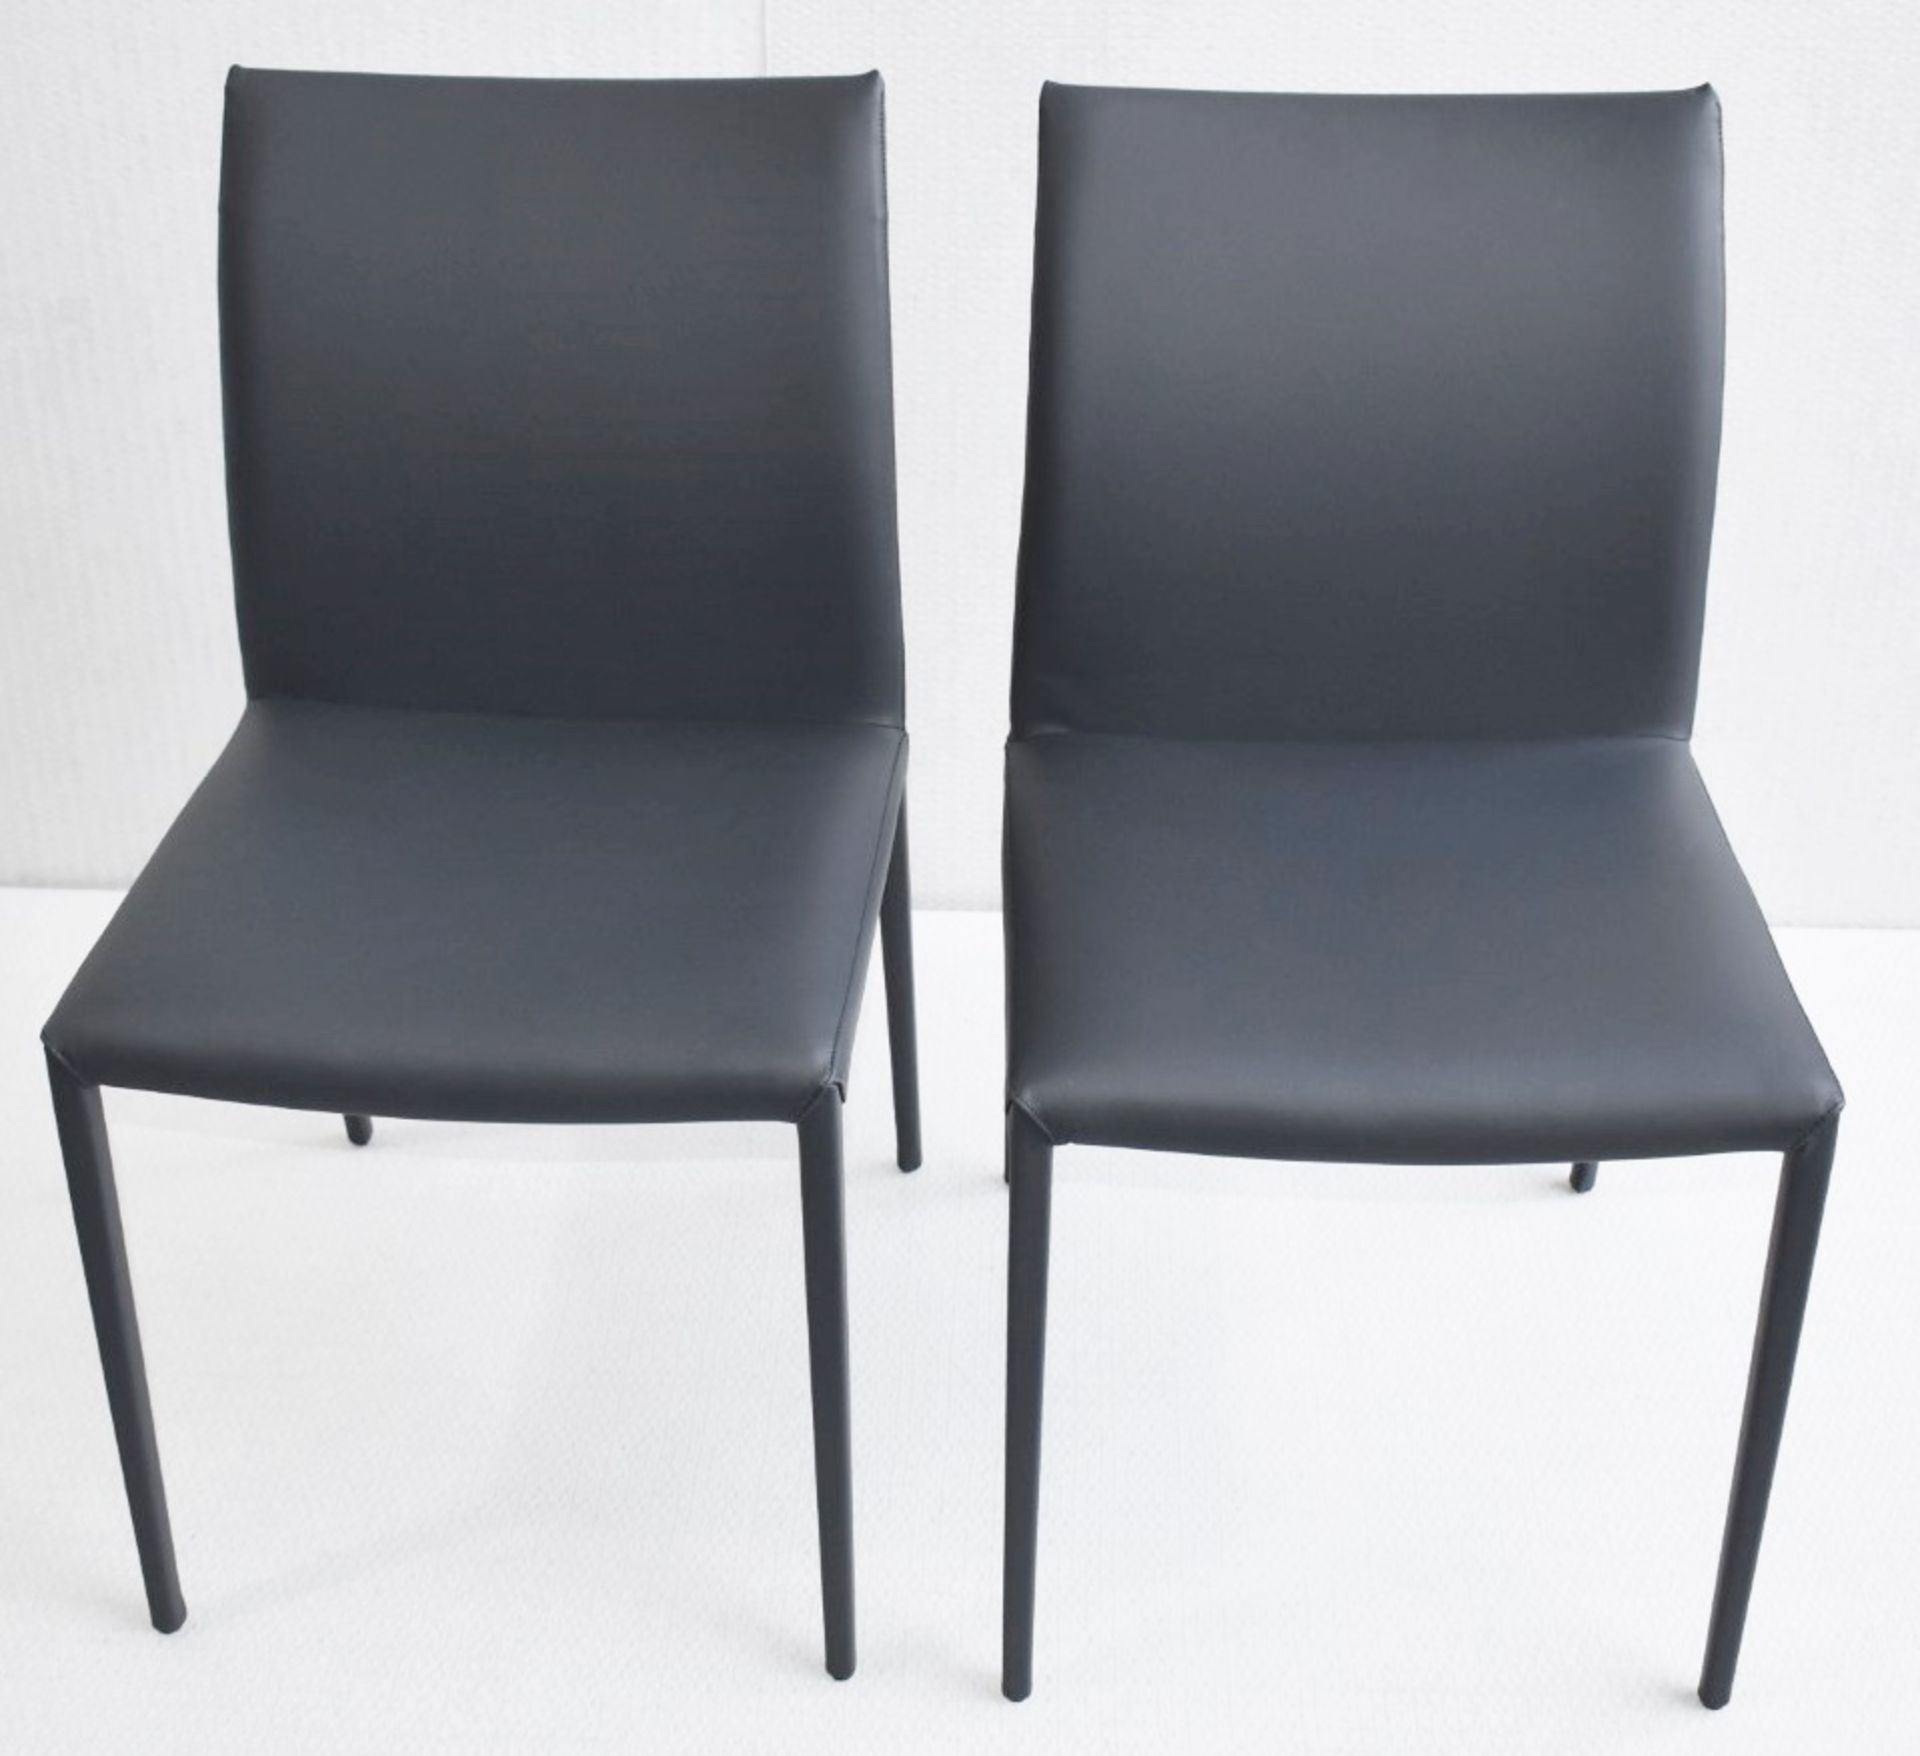 Pair of CATTELAN ITALIA Norma Designer Leather Upholstered Dining Chairs - Original Price £1,258 - Image 5 of 5